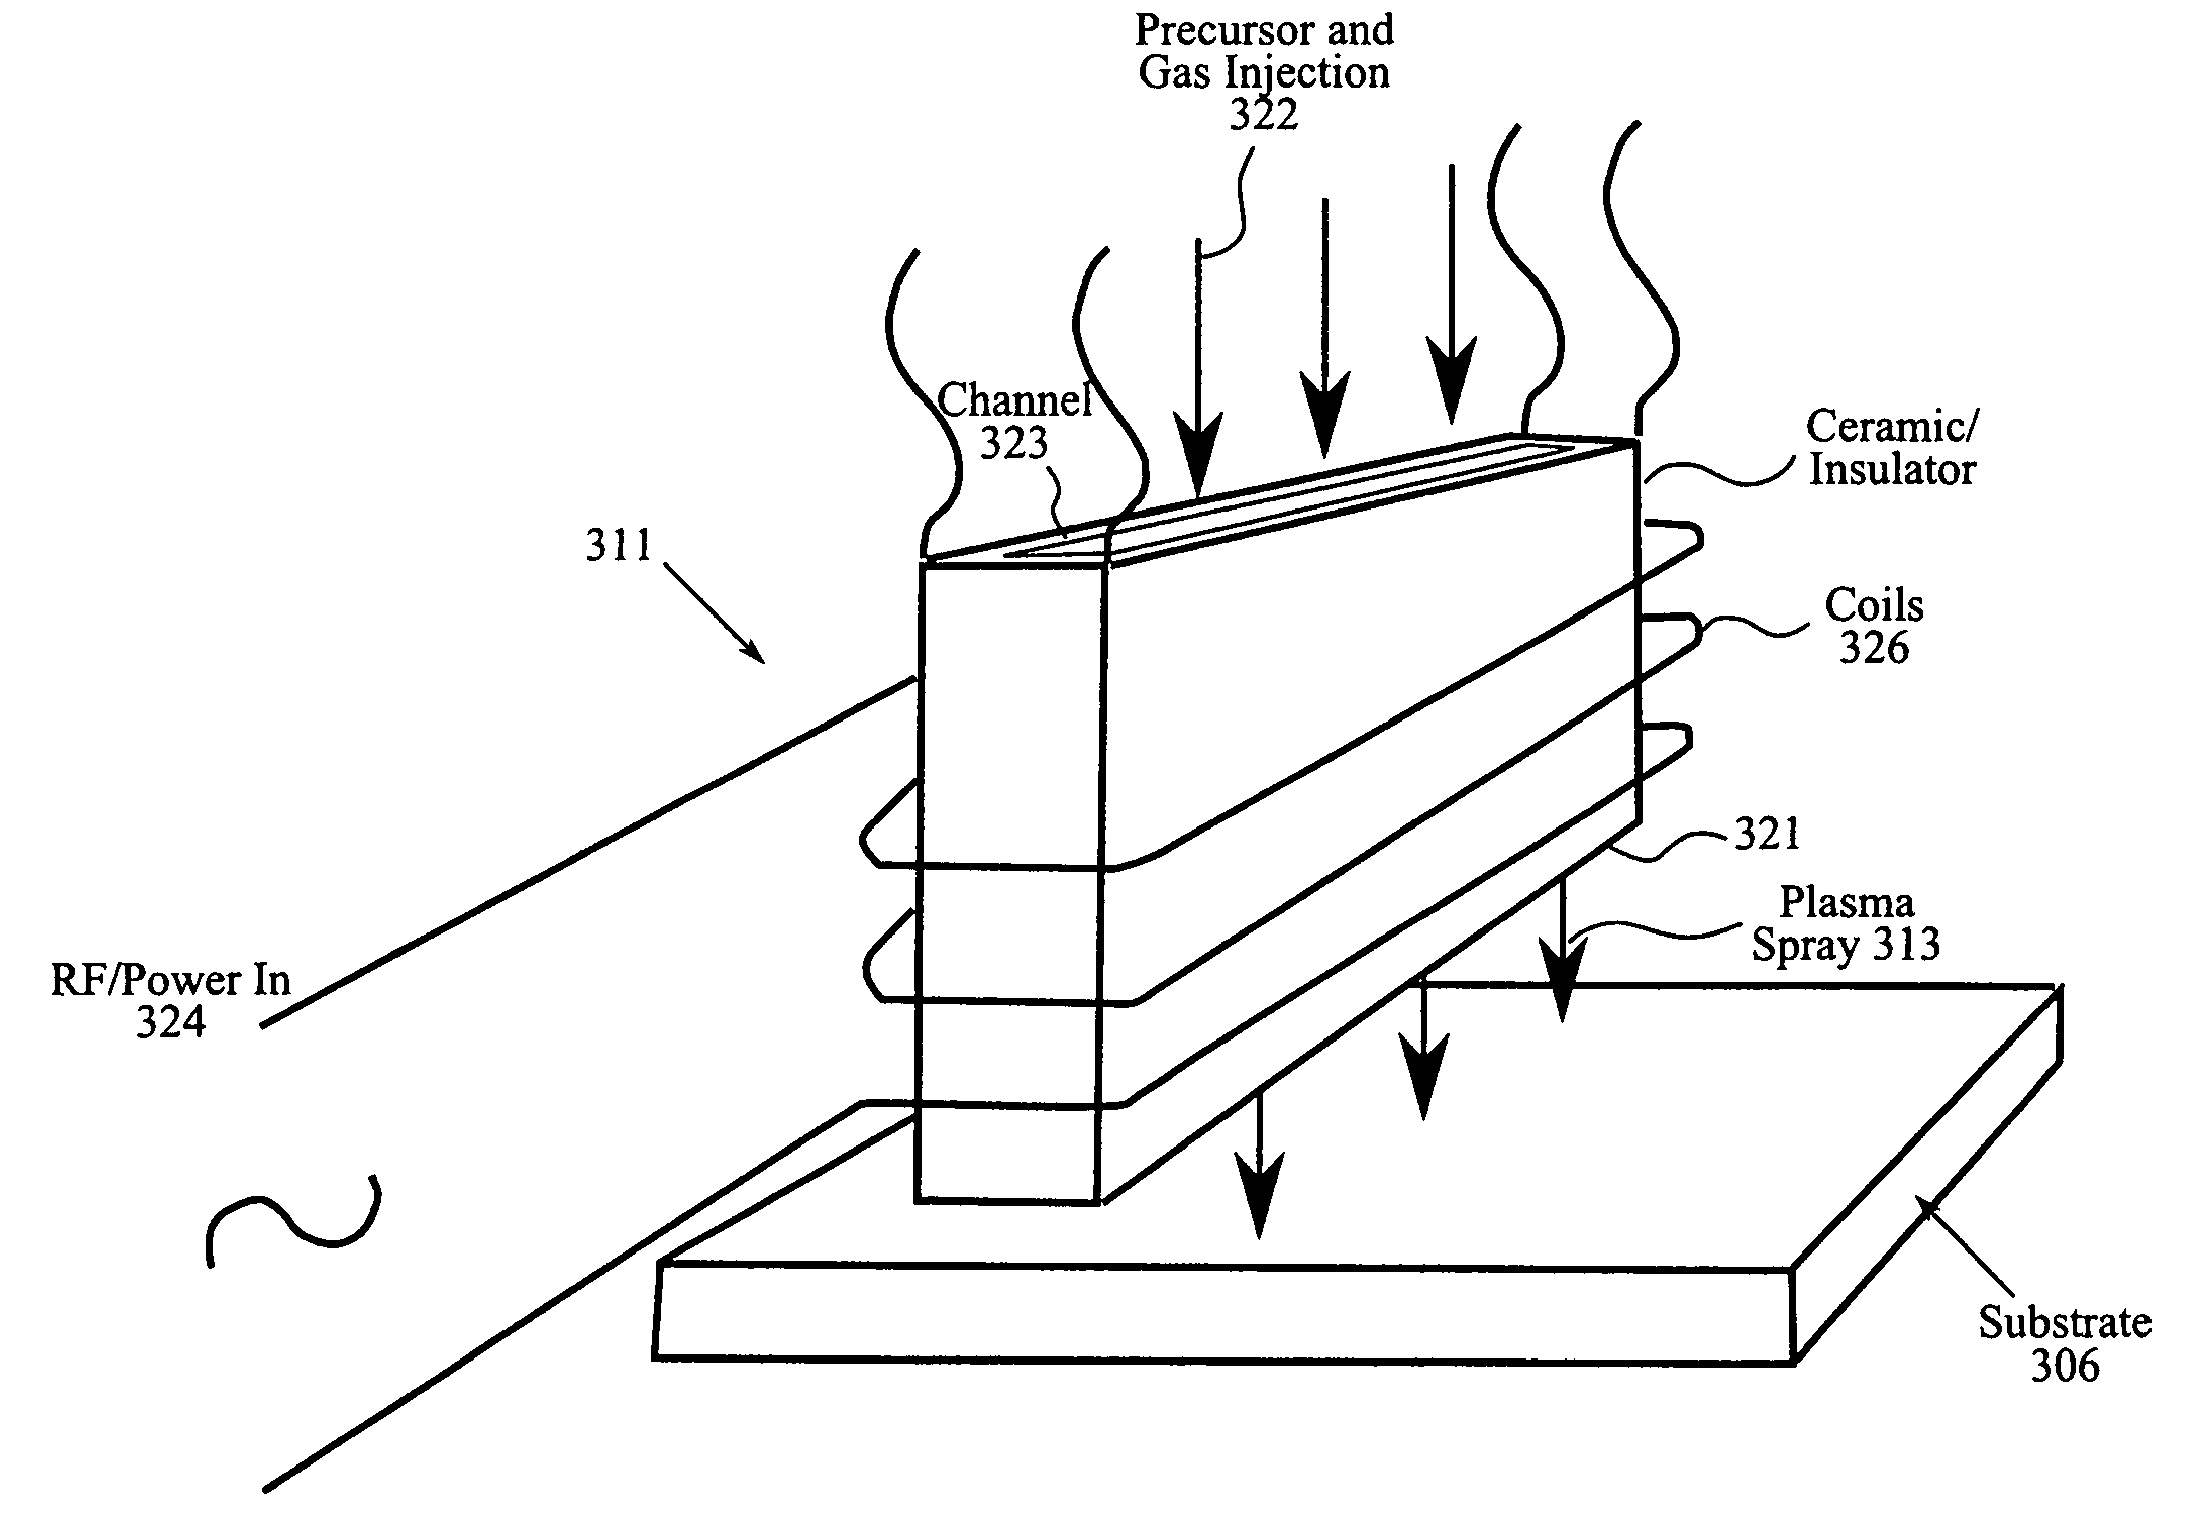 Methods and systems for manufacturing polycrystalline silicon and silicon-germanium solar cells